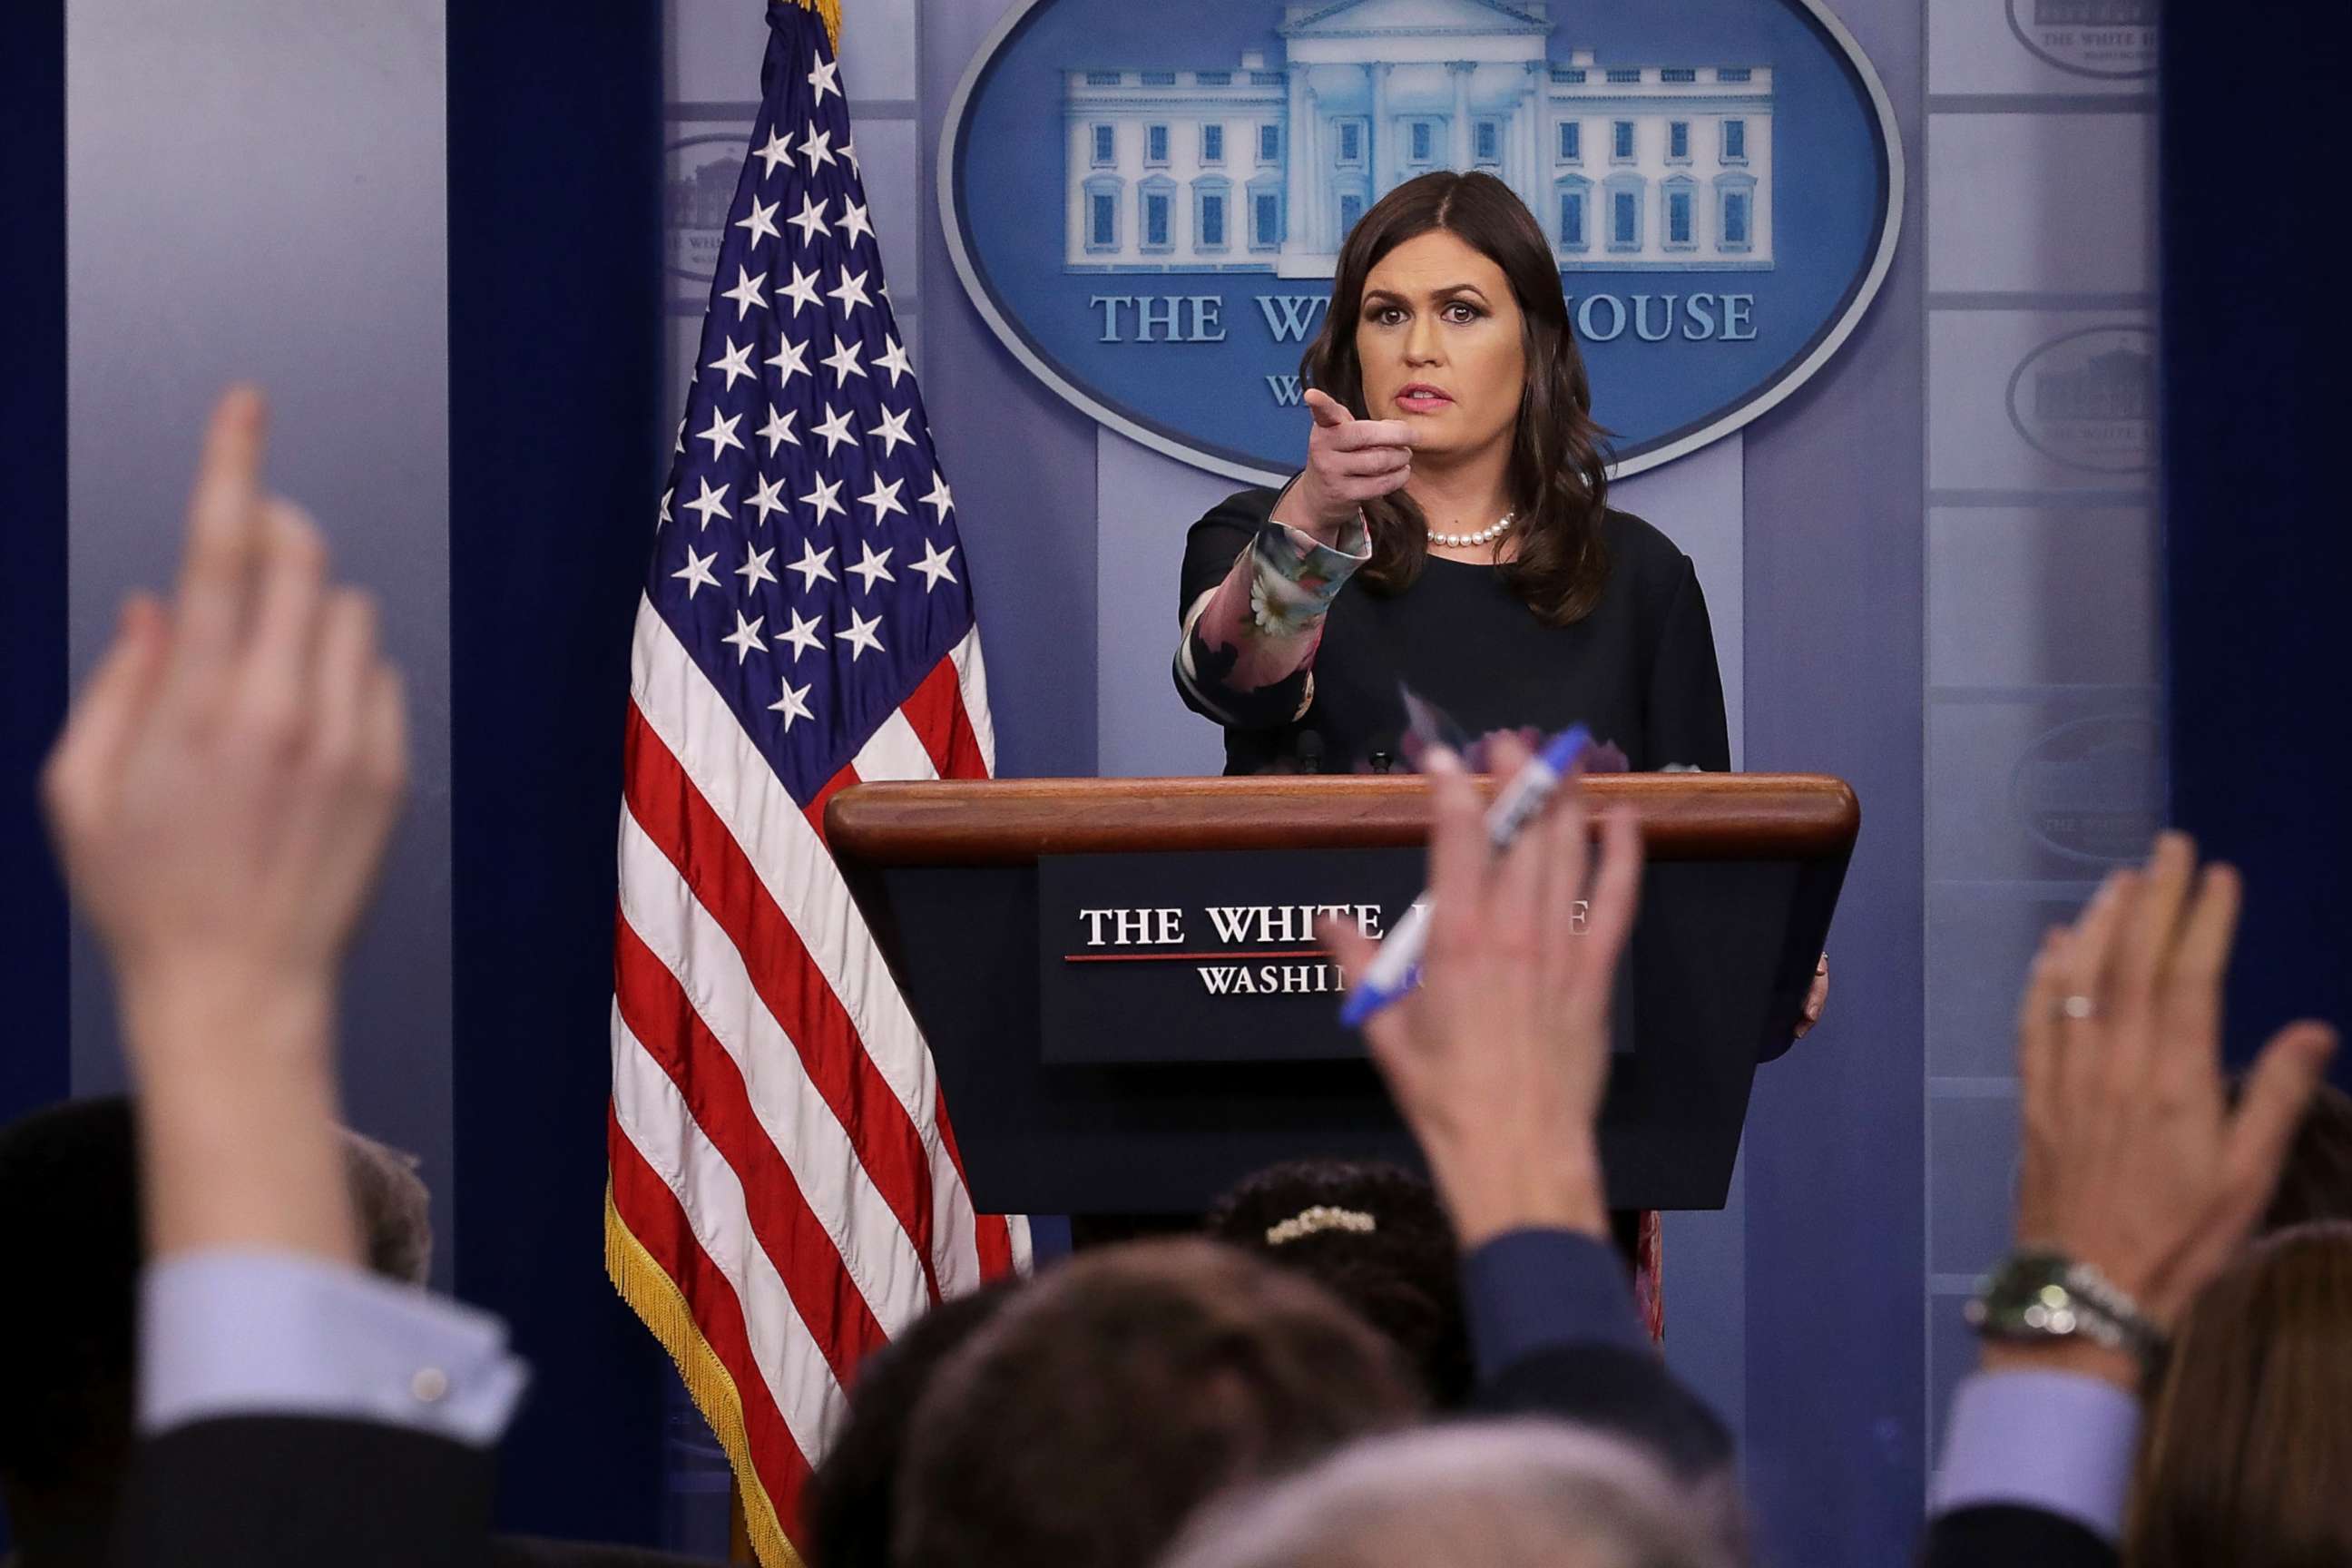 PHOTO: White House Press Secretary Sarah Huckabee Sanders takes reporters' questions during a news conference in the Brady Press Briefing Room at the White House, Nov. 17, 2017, in Washington.